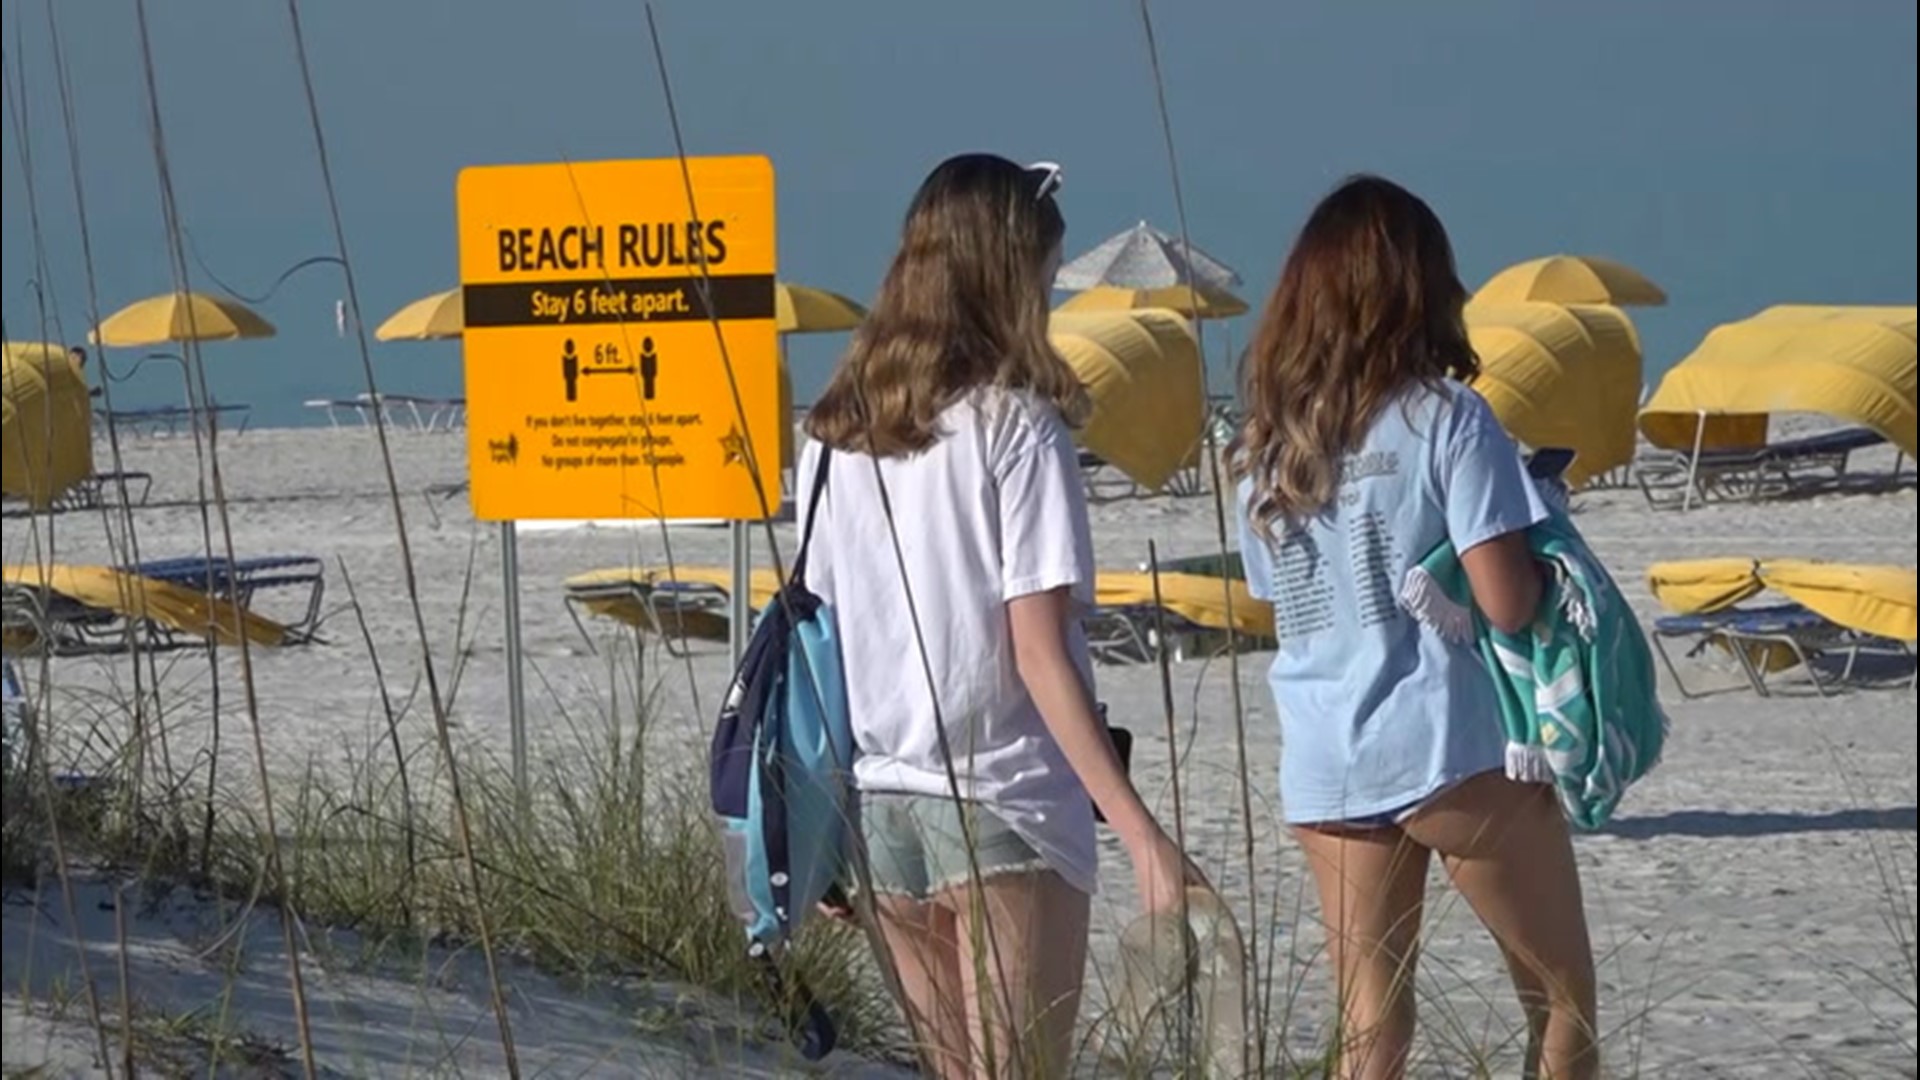 Thirty-five miles of iconic beaches, from Clearwater to St. Pete Beach, are back open after being closed for a month and a half due to COVID-19 concerns.